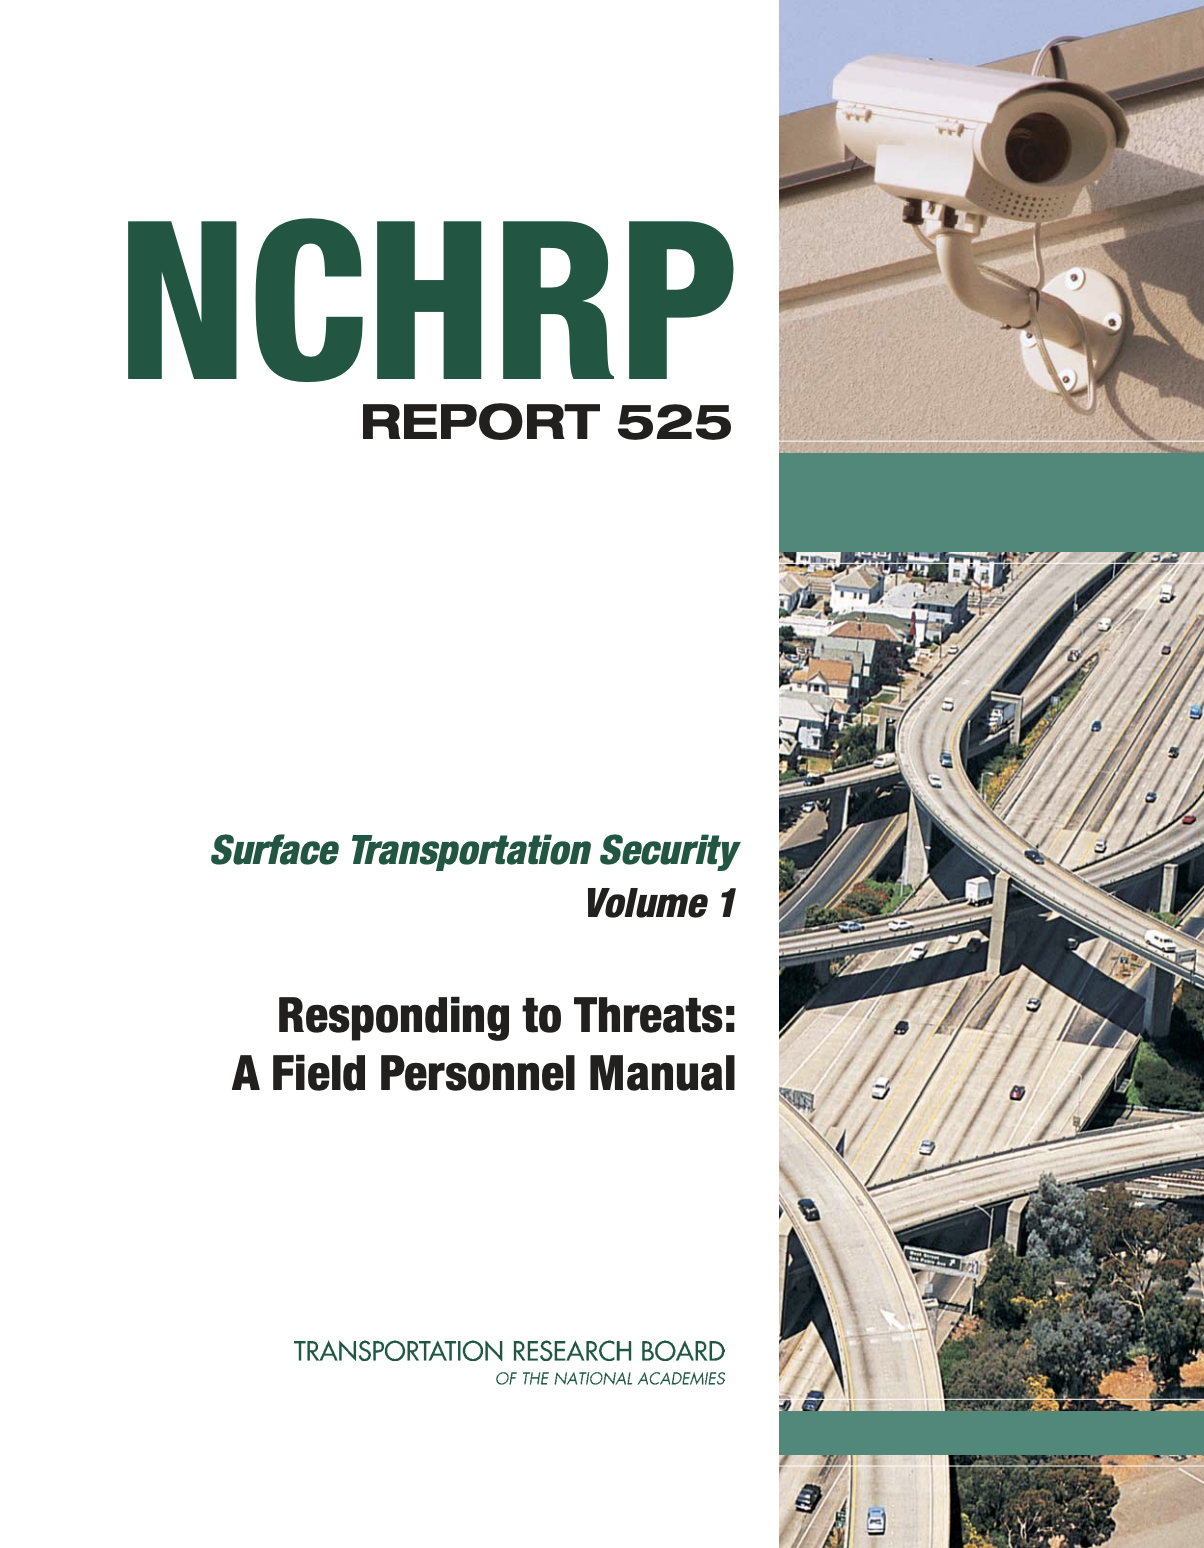 NCHRP Report 525: Surface Transportation Security Volume 1, Responding to Threats: A Field Personnel Manual [PUB]